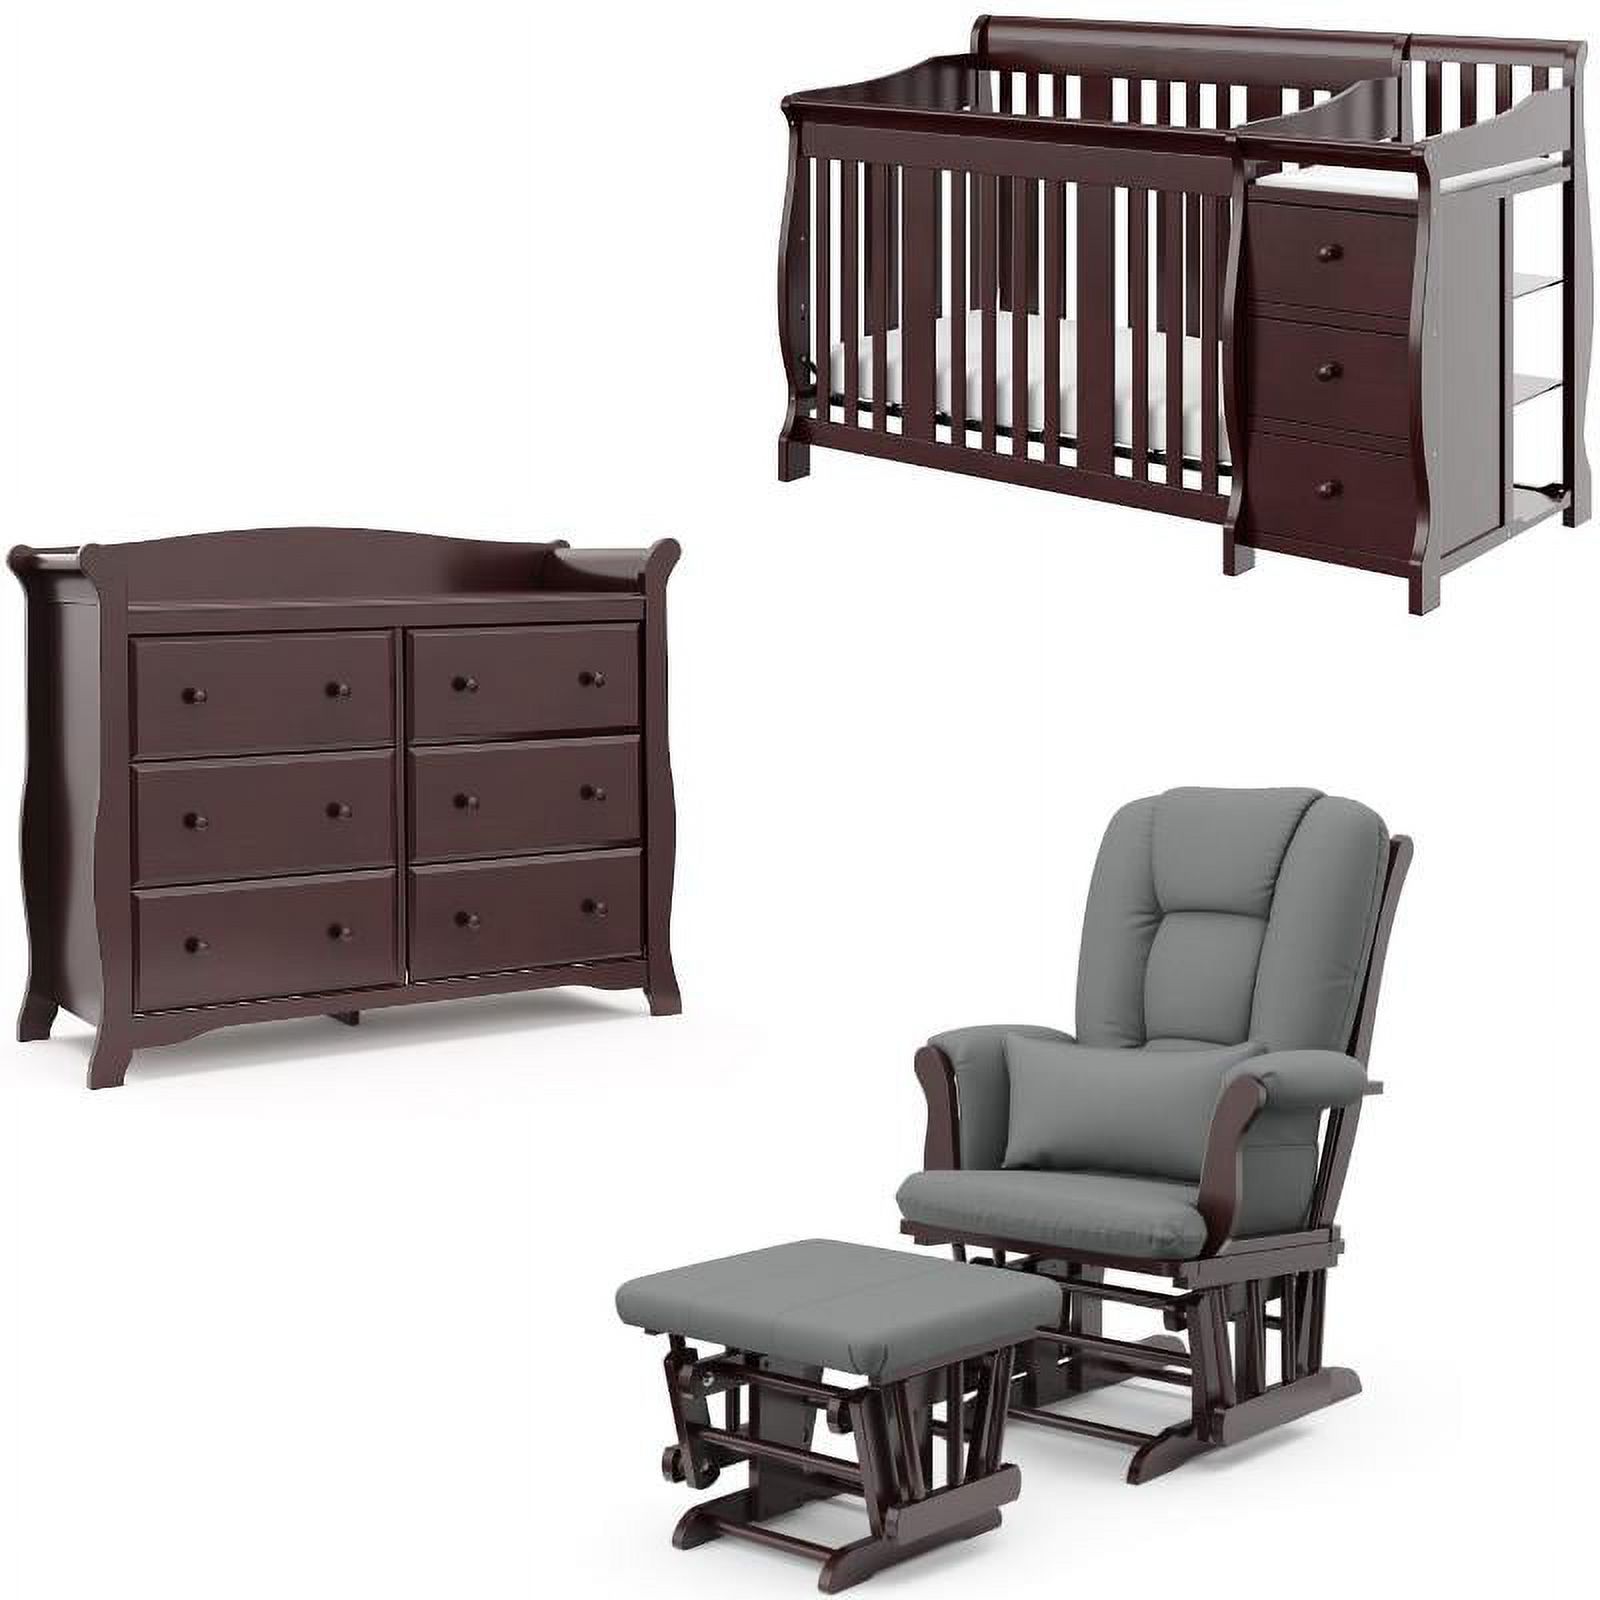 3-Piece Crib and Changing Table Set with Dresser and Glider Ottoman in Espresso - image 1 of 21